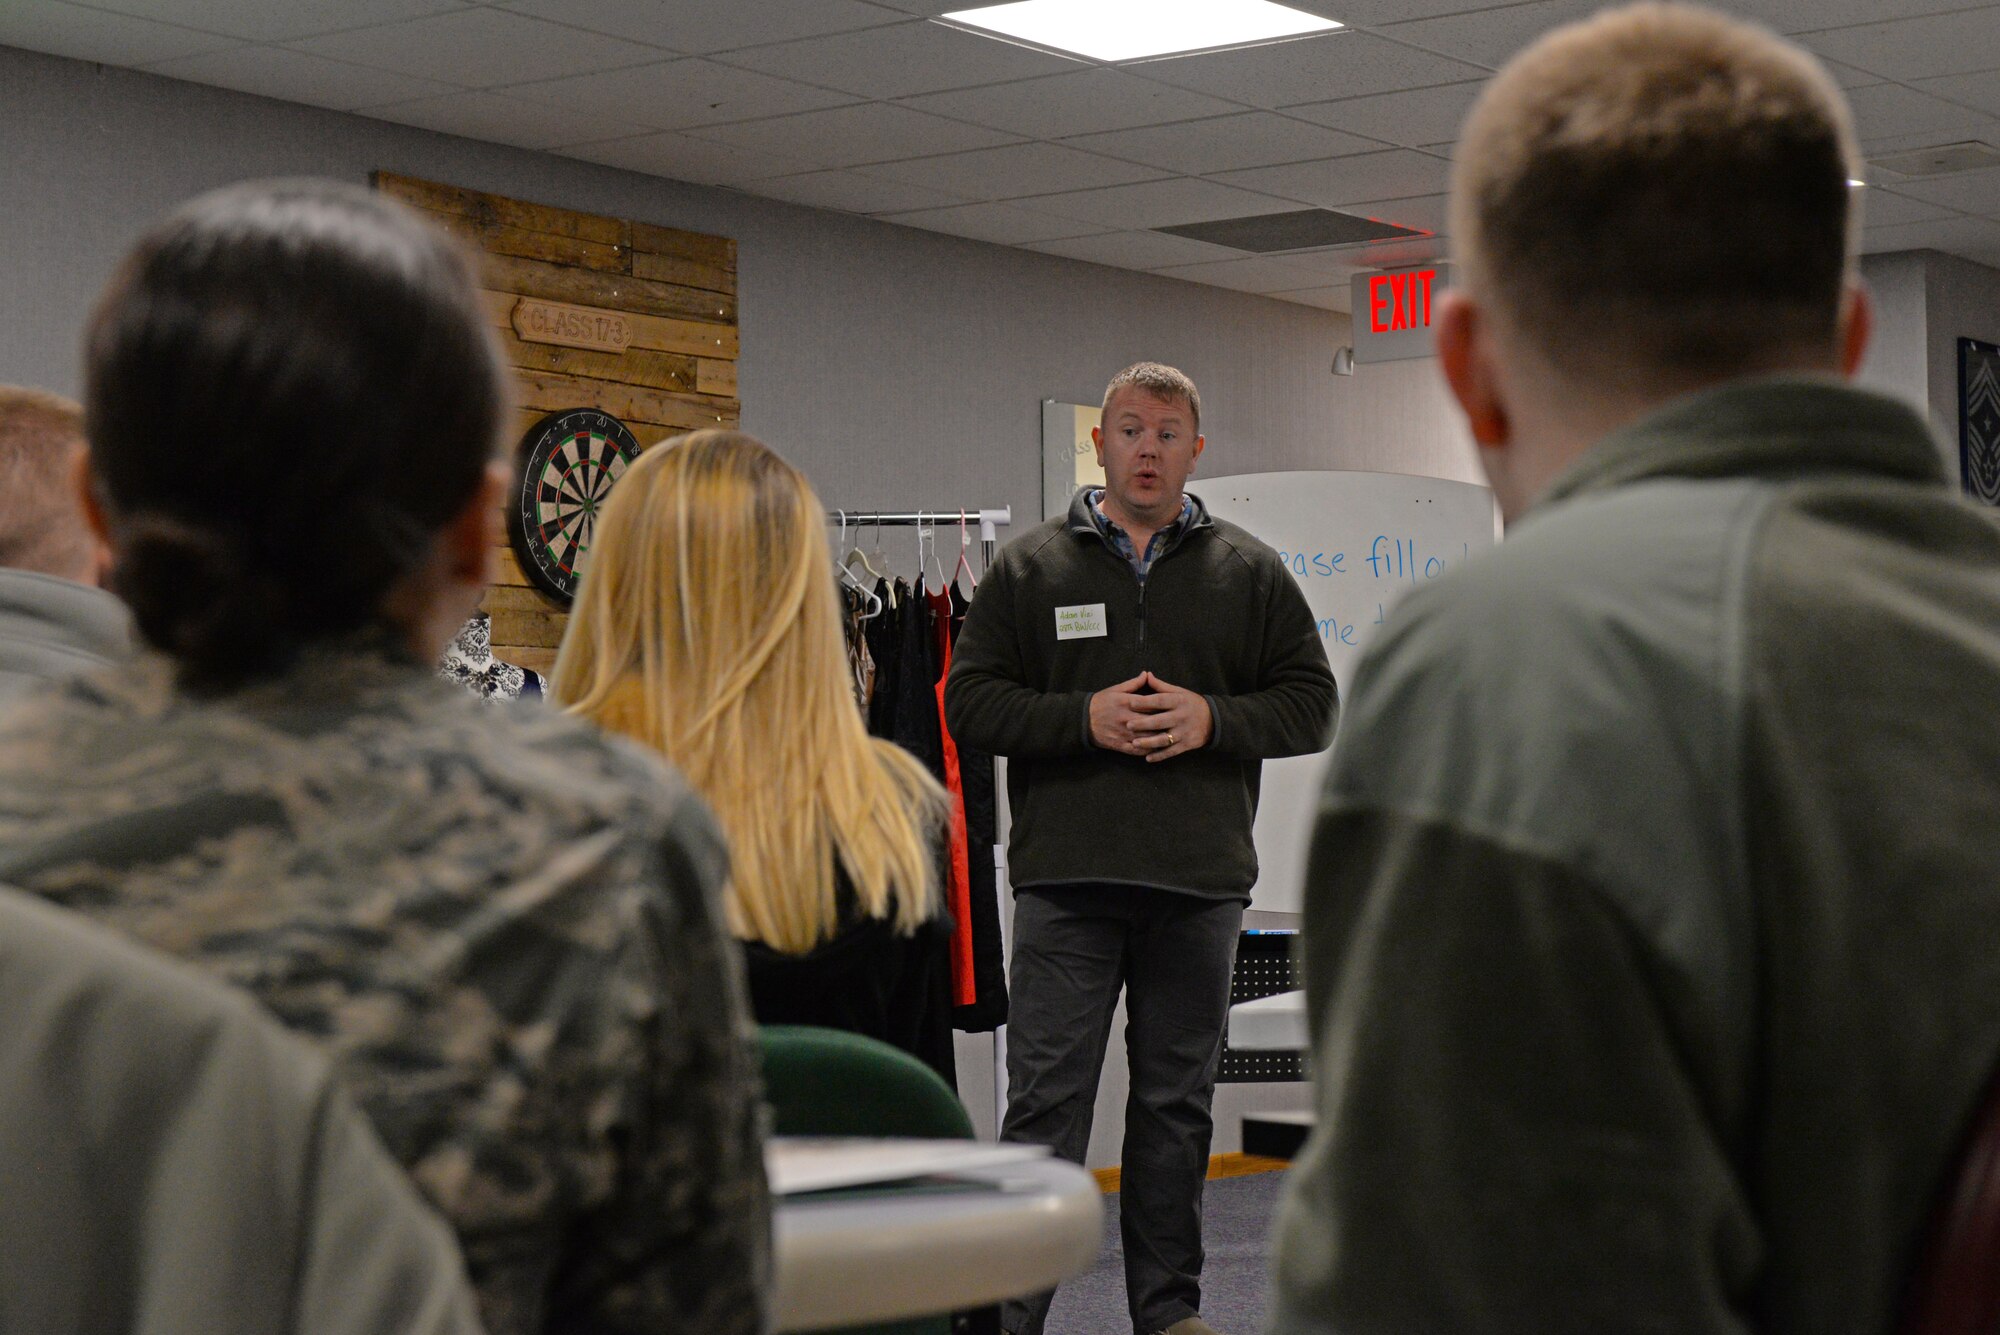 Chief Master Sgt. Adam Vizi, the 28th Bomb Wing command chief, briefs a group of Airmen and their spouses on appropriate attire during the first spouse’s orientation program in the Samuel O. Turner building at Ellsworth Air Force Base, S.D., Jan. 12, 2018. During the course, attendees learned about the appropriate attire for formal military events, the importance of creating networks and proper military etiquette. (U.S. Air Force photo by Airman 1st Class Nicolas Z. Erwin)